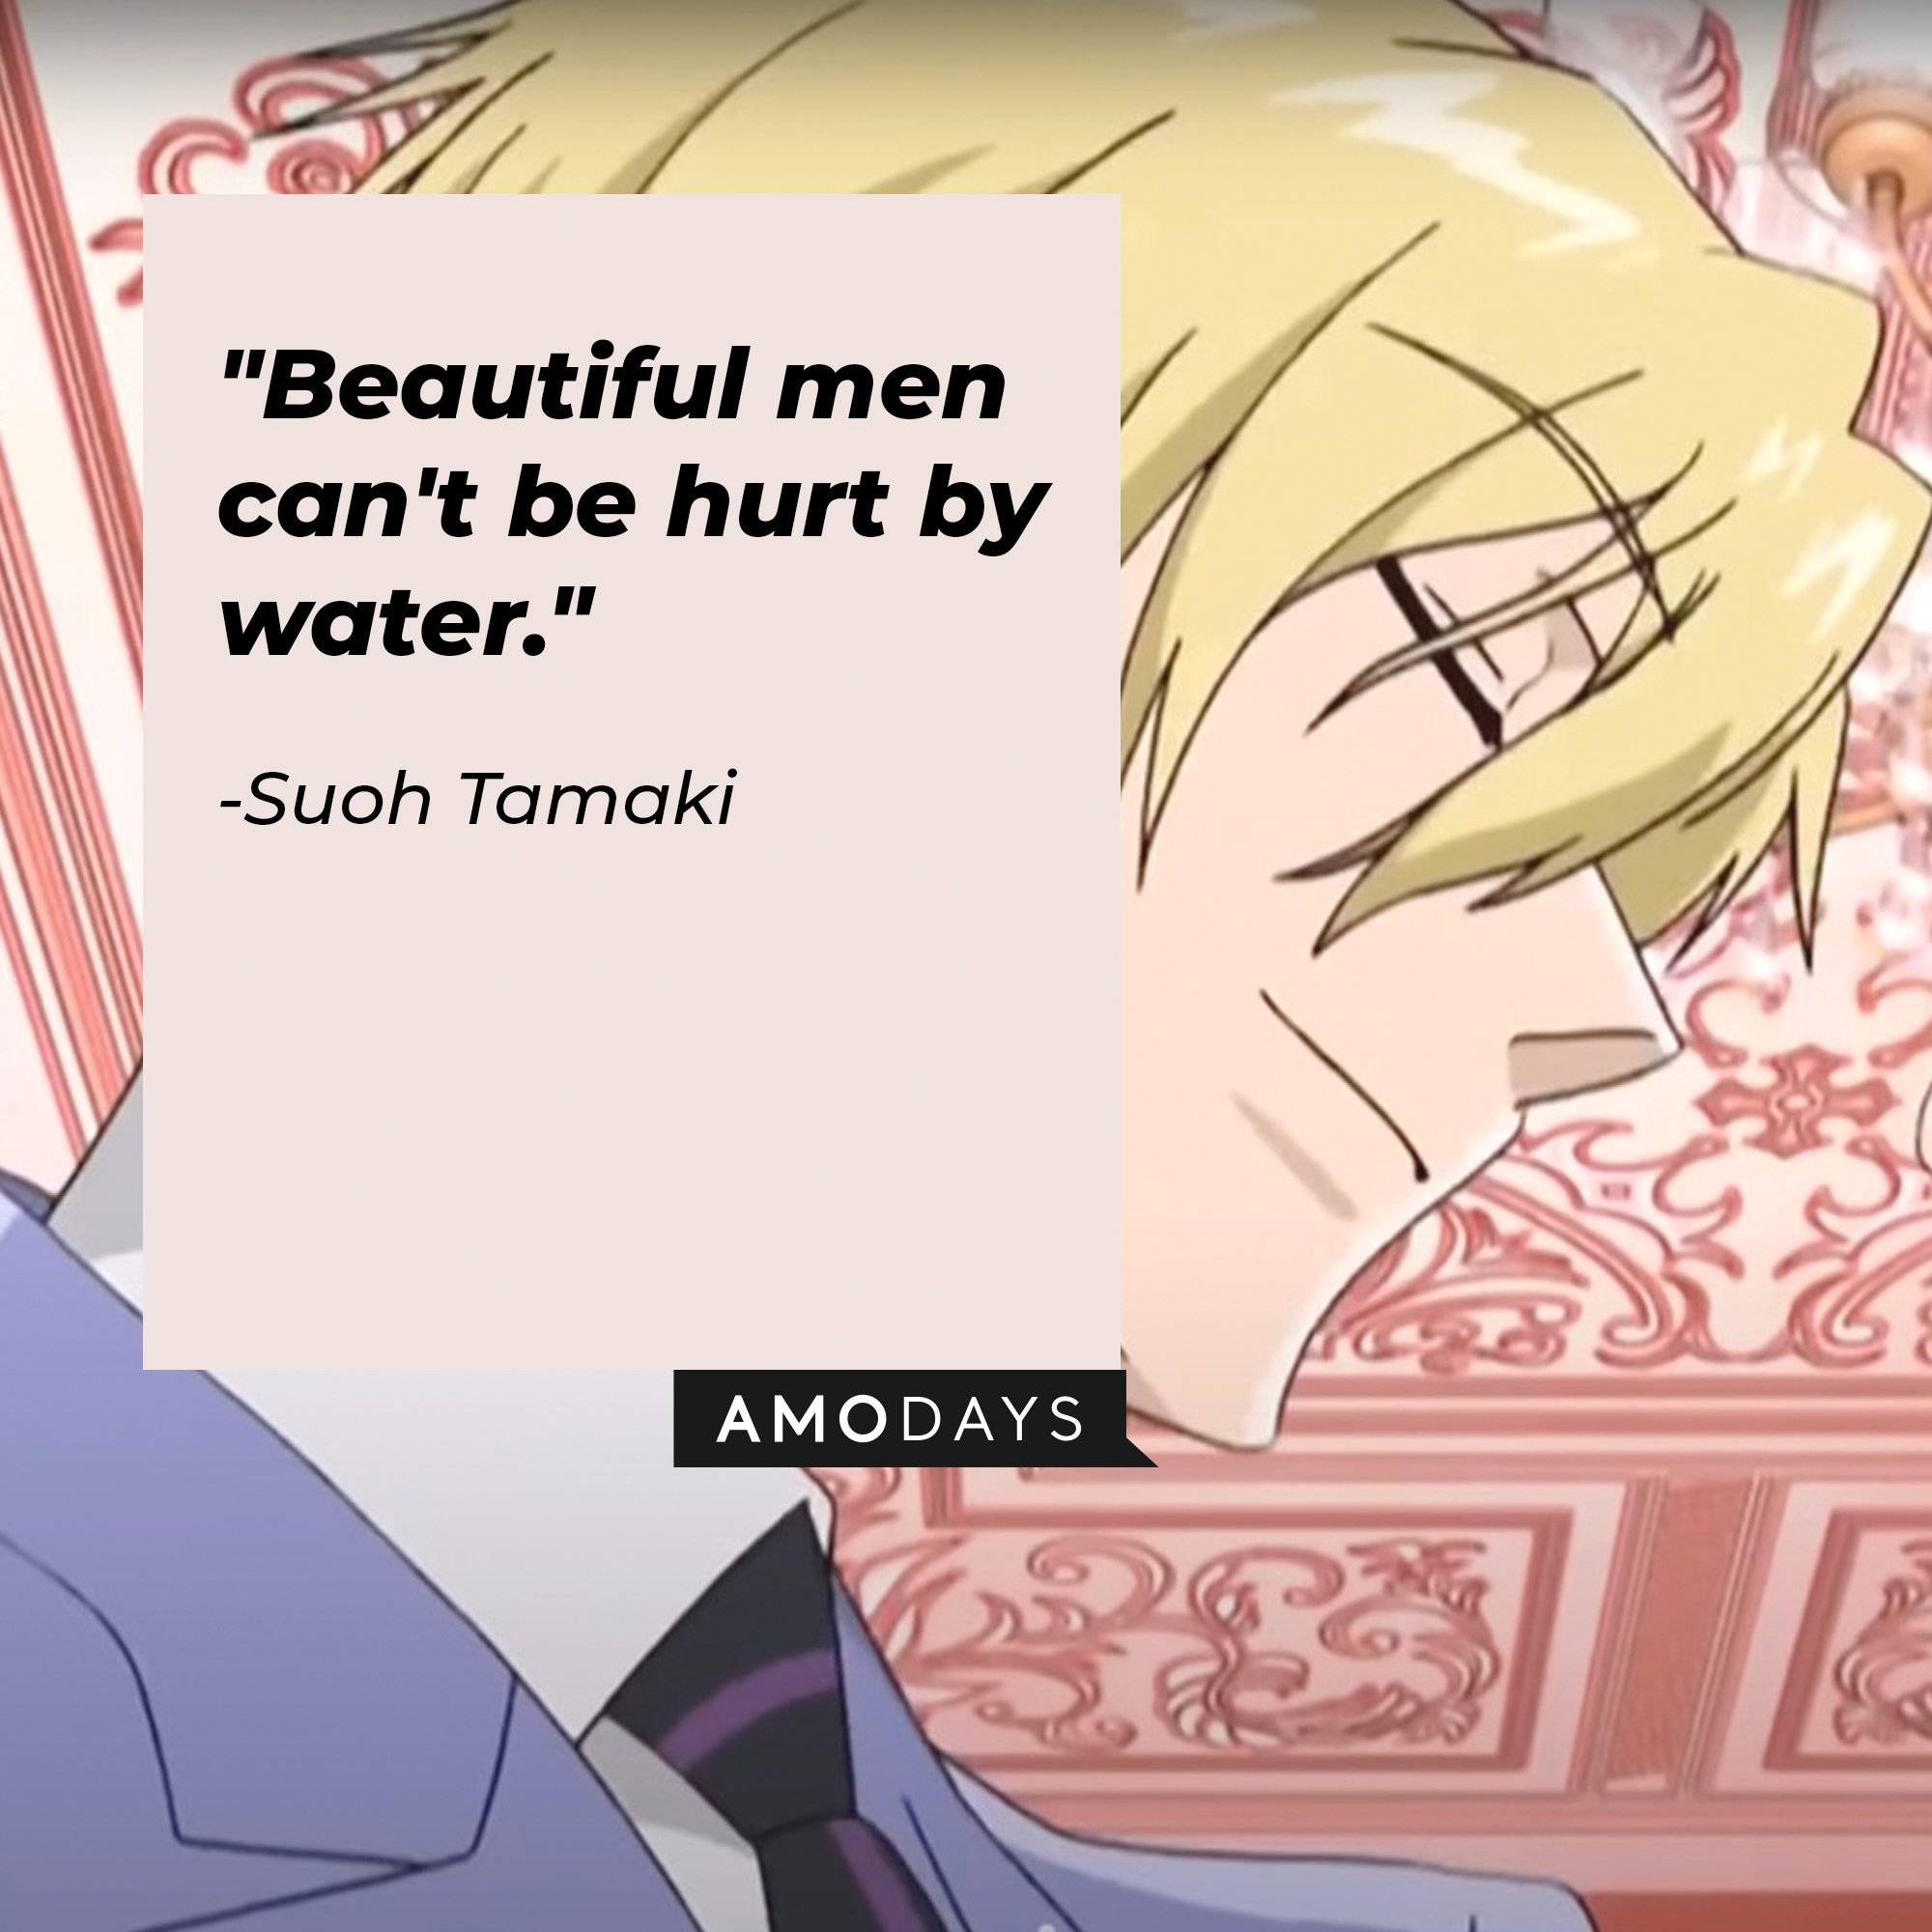 Suoh Tamaki's quote: "Beautiful men can't be hurt by water." | Source: Facebook.com/theouranhostclub